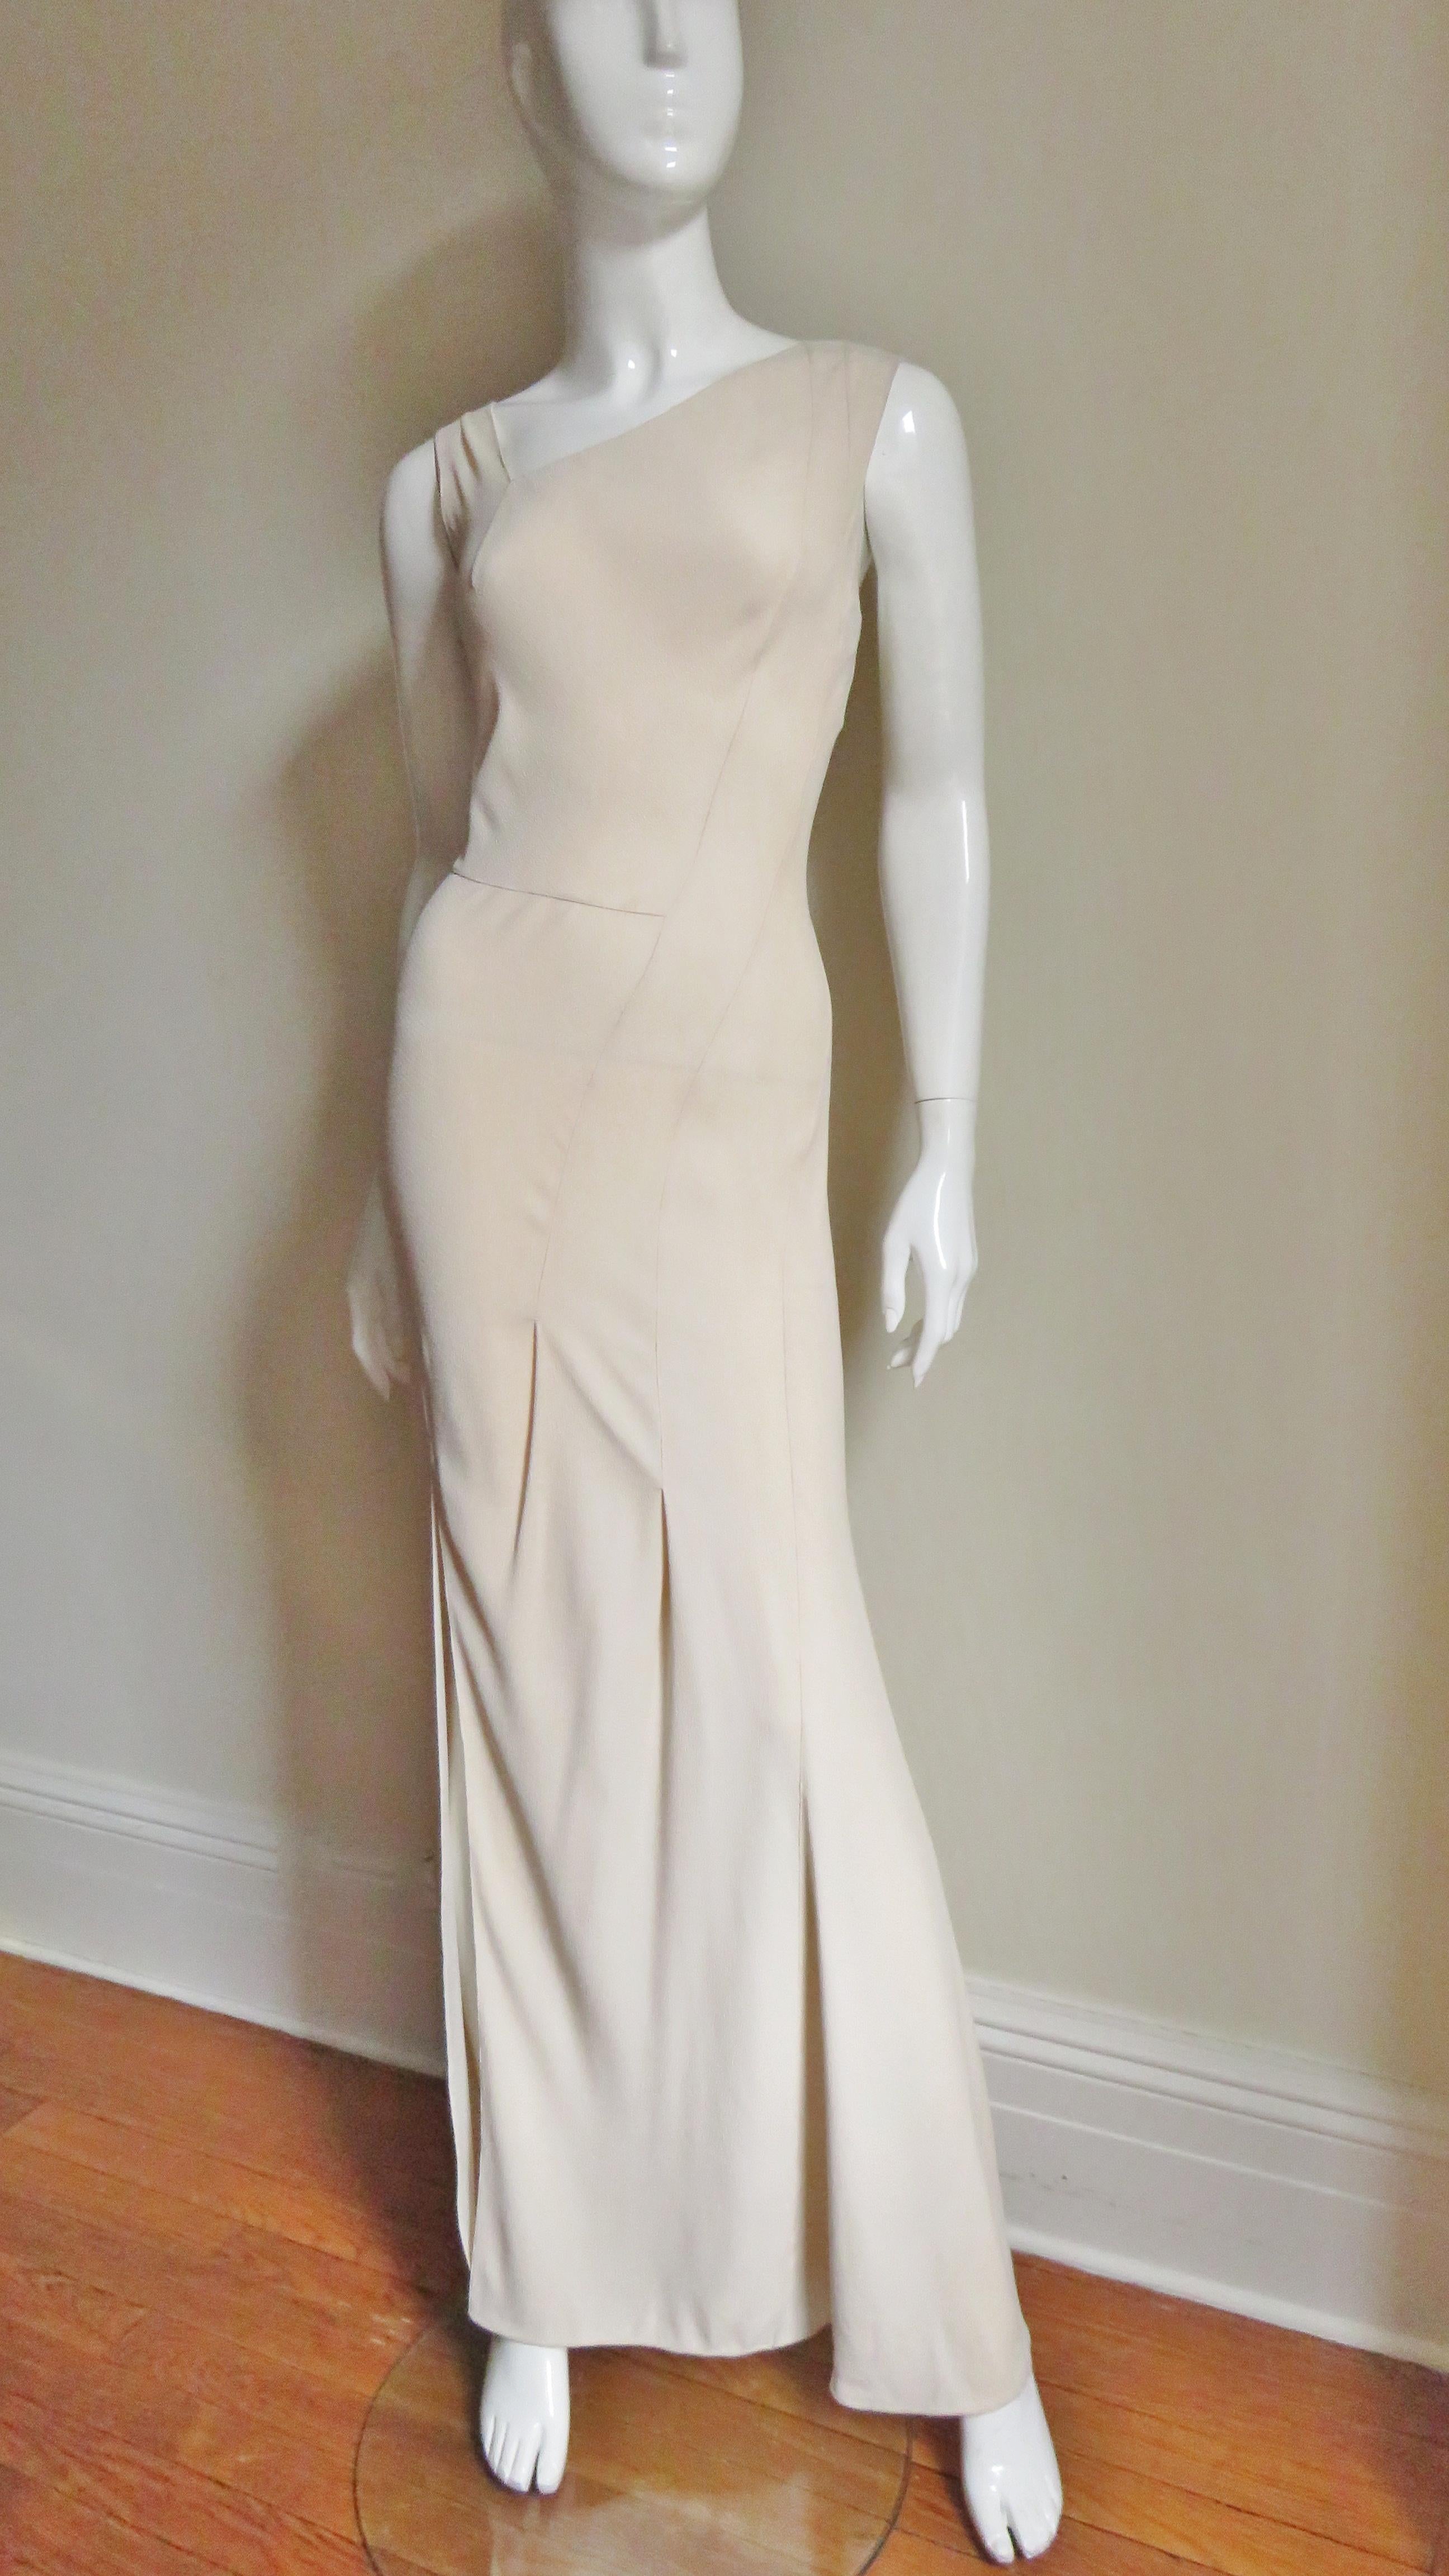 A Christian Dior gown in a pale shade of blush silk, reminiscent of the 1930's.  A long fitted sleeveless silhouette with asymmetrical neckline and seaming.  Seaming starts at one shoulder angling down to the center front thighs.  There is a waist